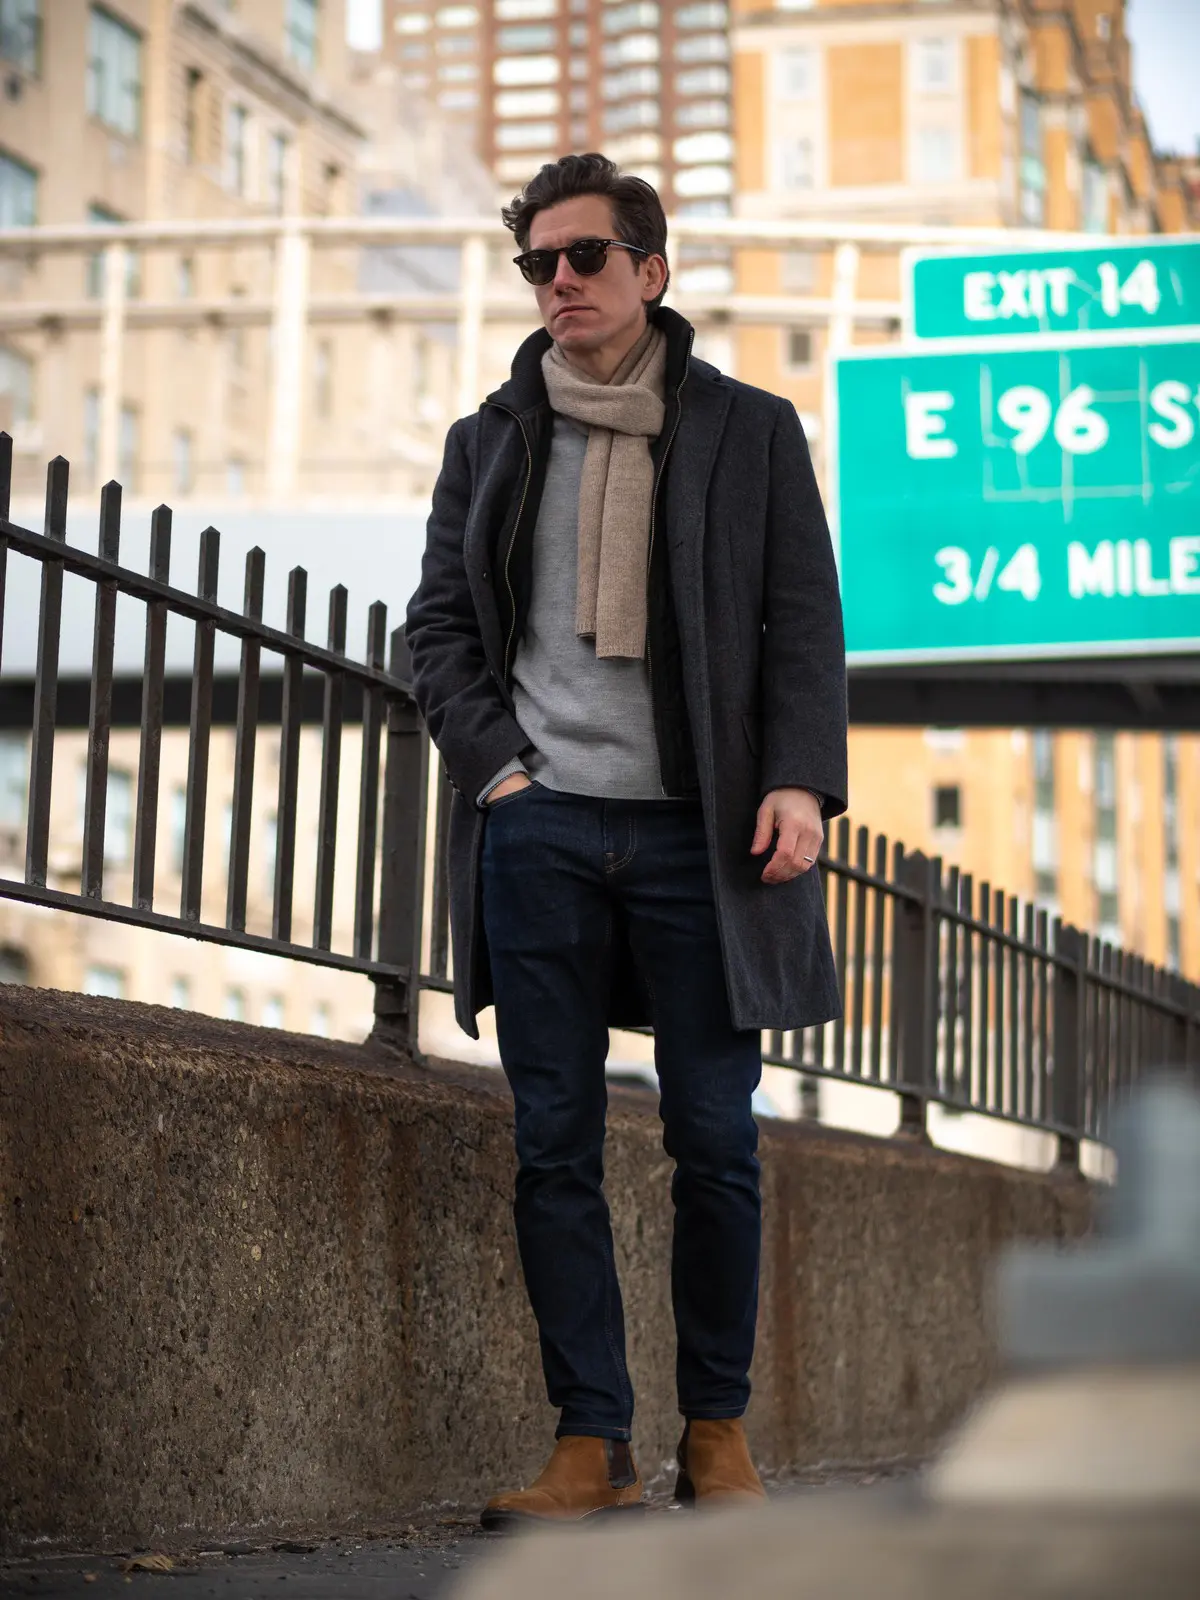 Topcoat, Jeans and Chelseas - featured